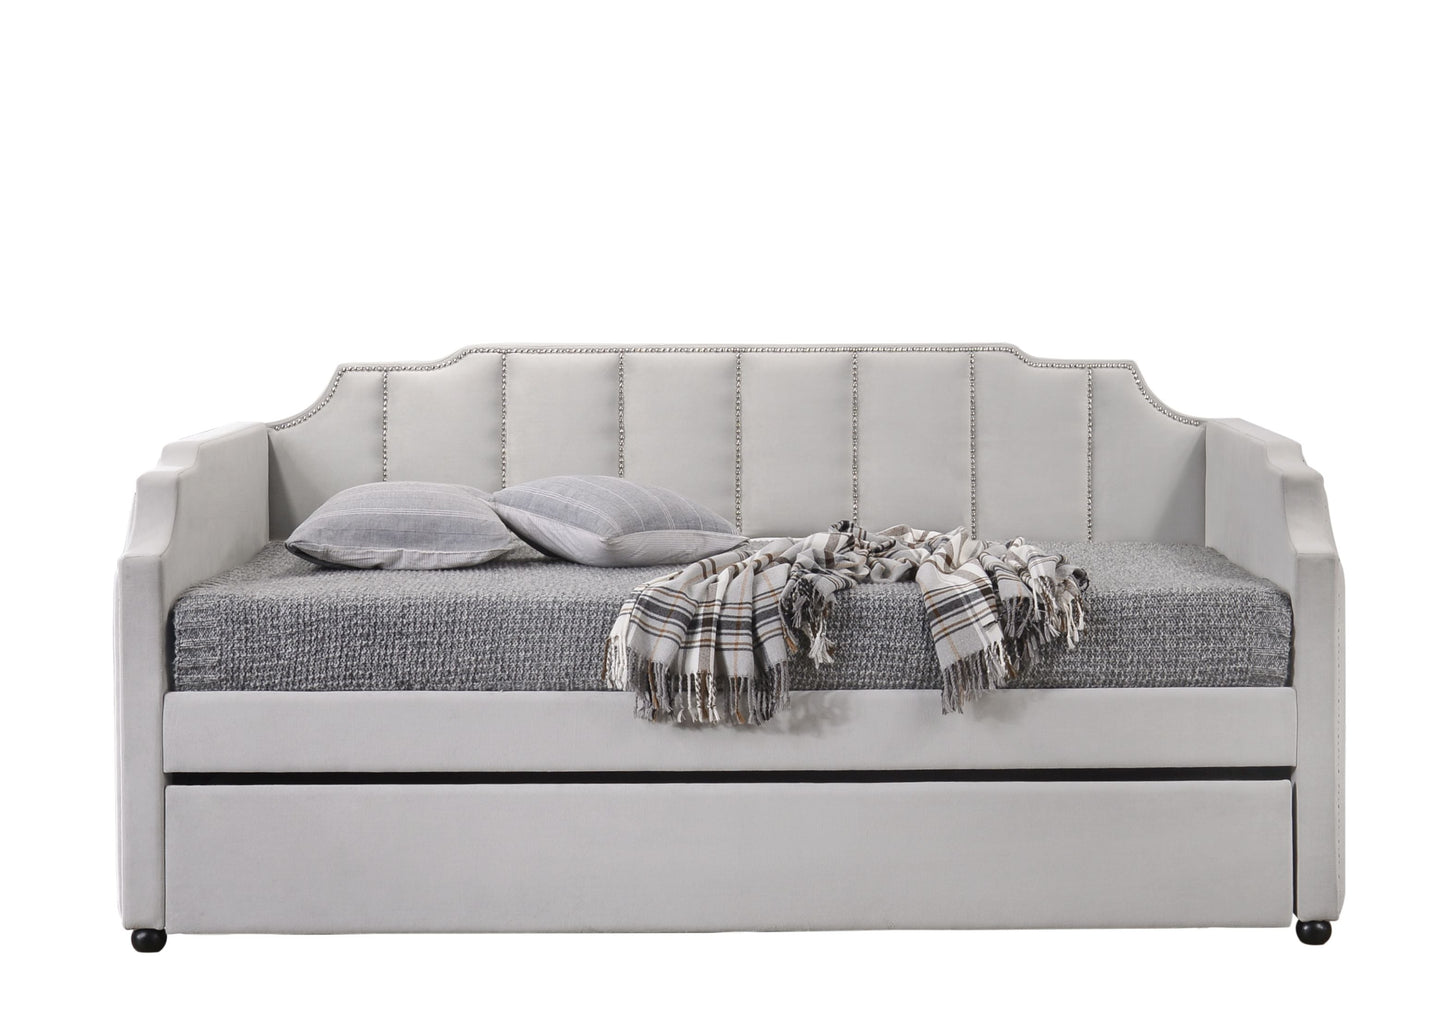 Peridot Daybed & Trundle (Twin Size), Dove Gray Velvet (1Set/2Ctn) 39410 - Demine Essentials